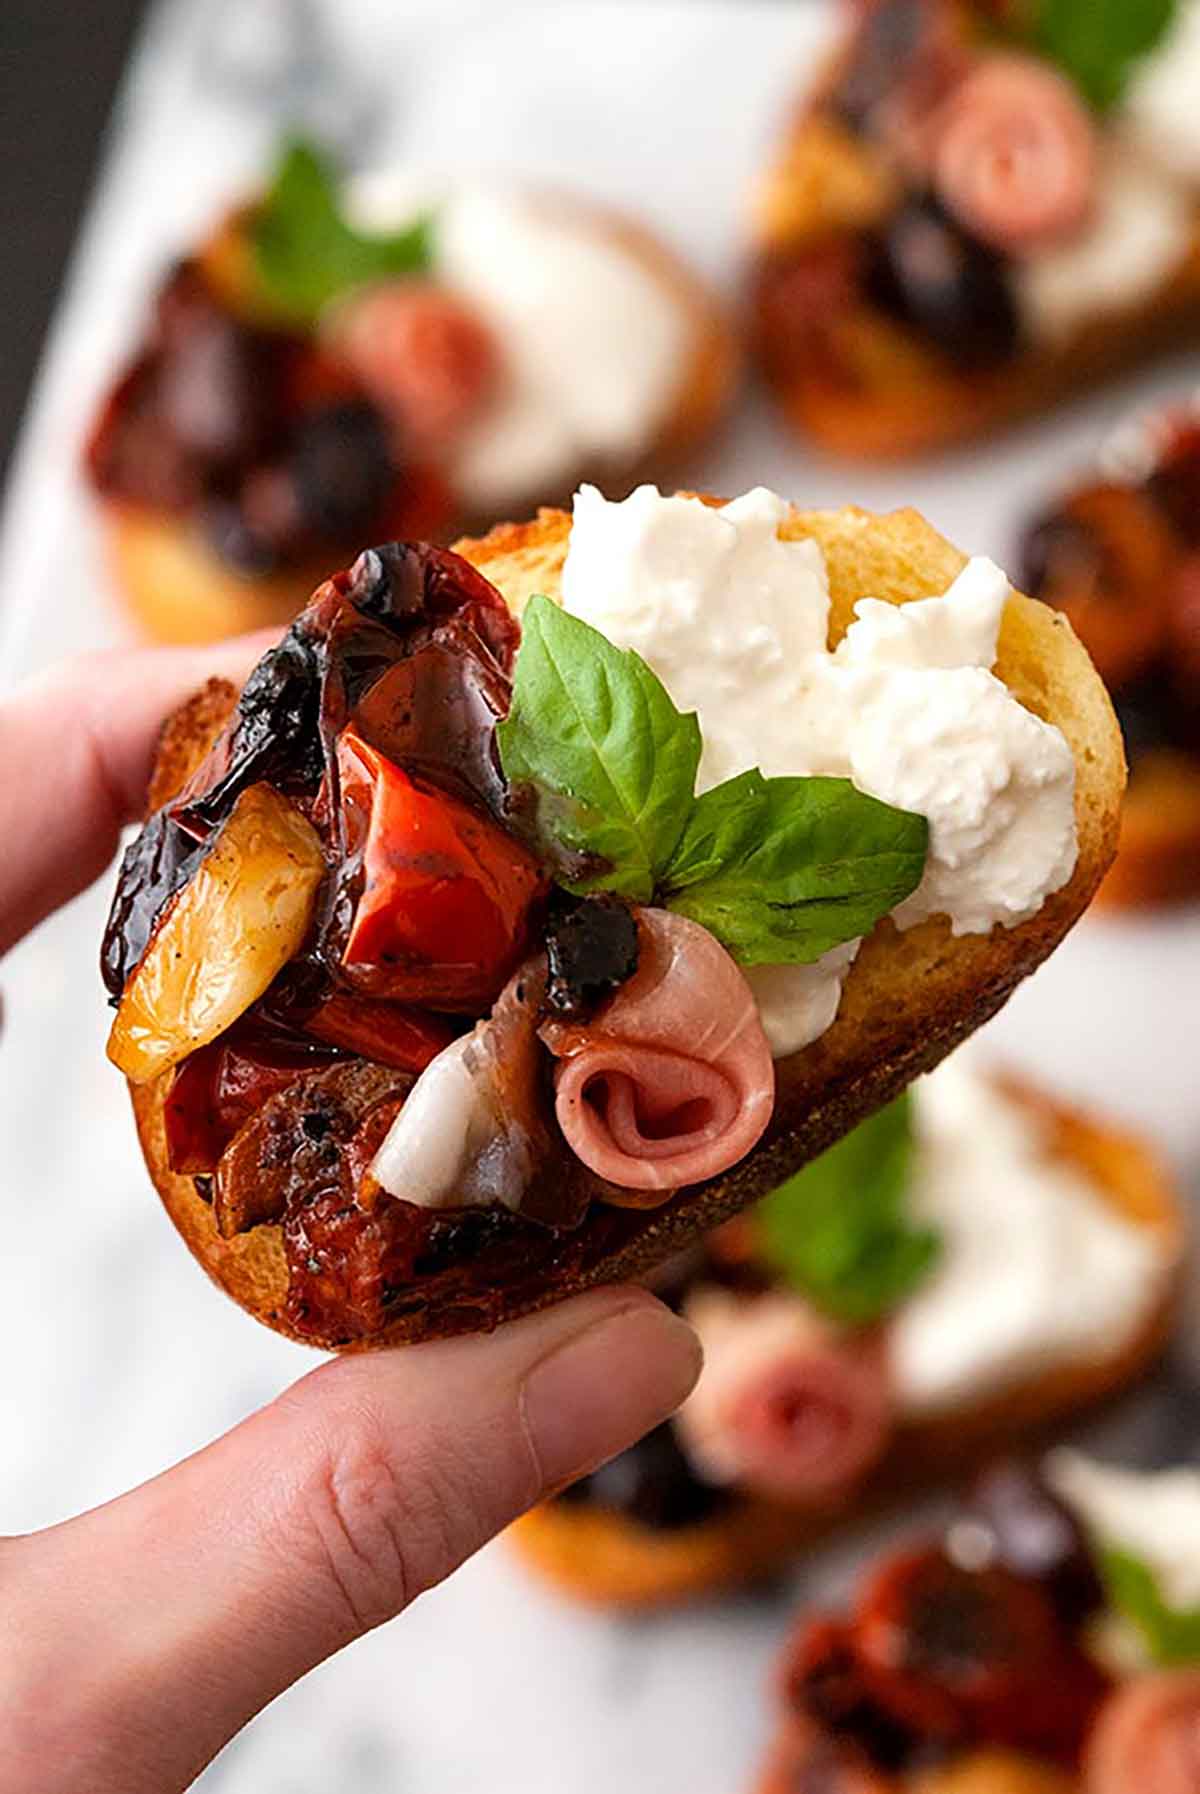 Fingers holding a bruschetta with tomato, burrata and a prosciutto rose, garnished with basil.